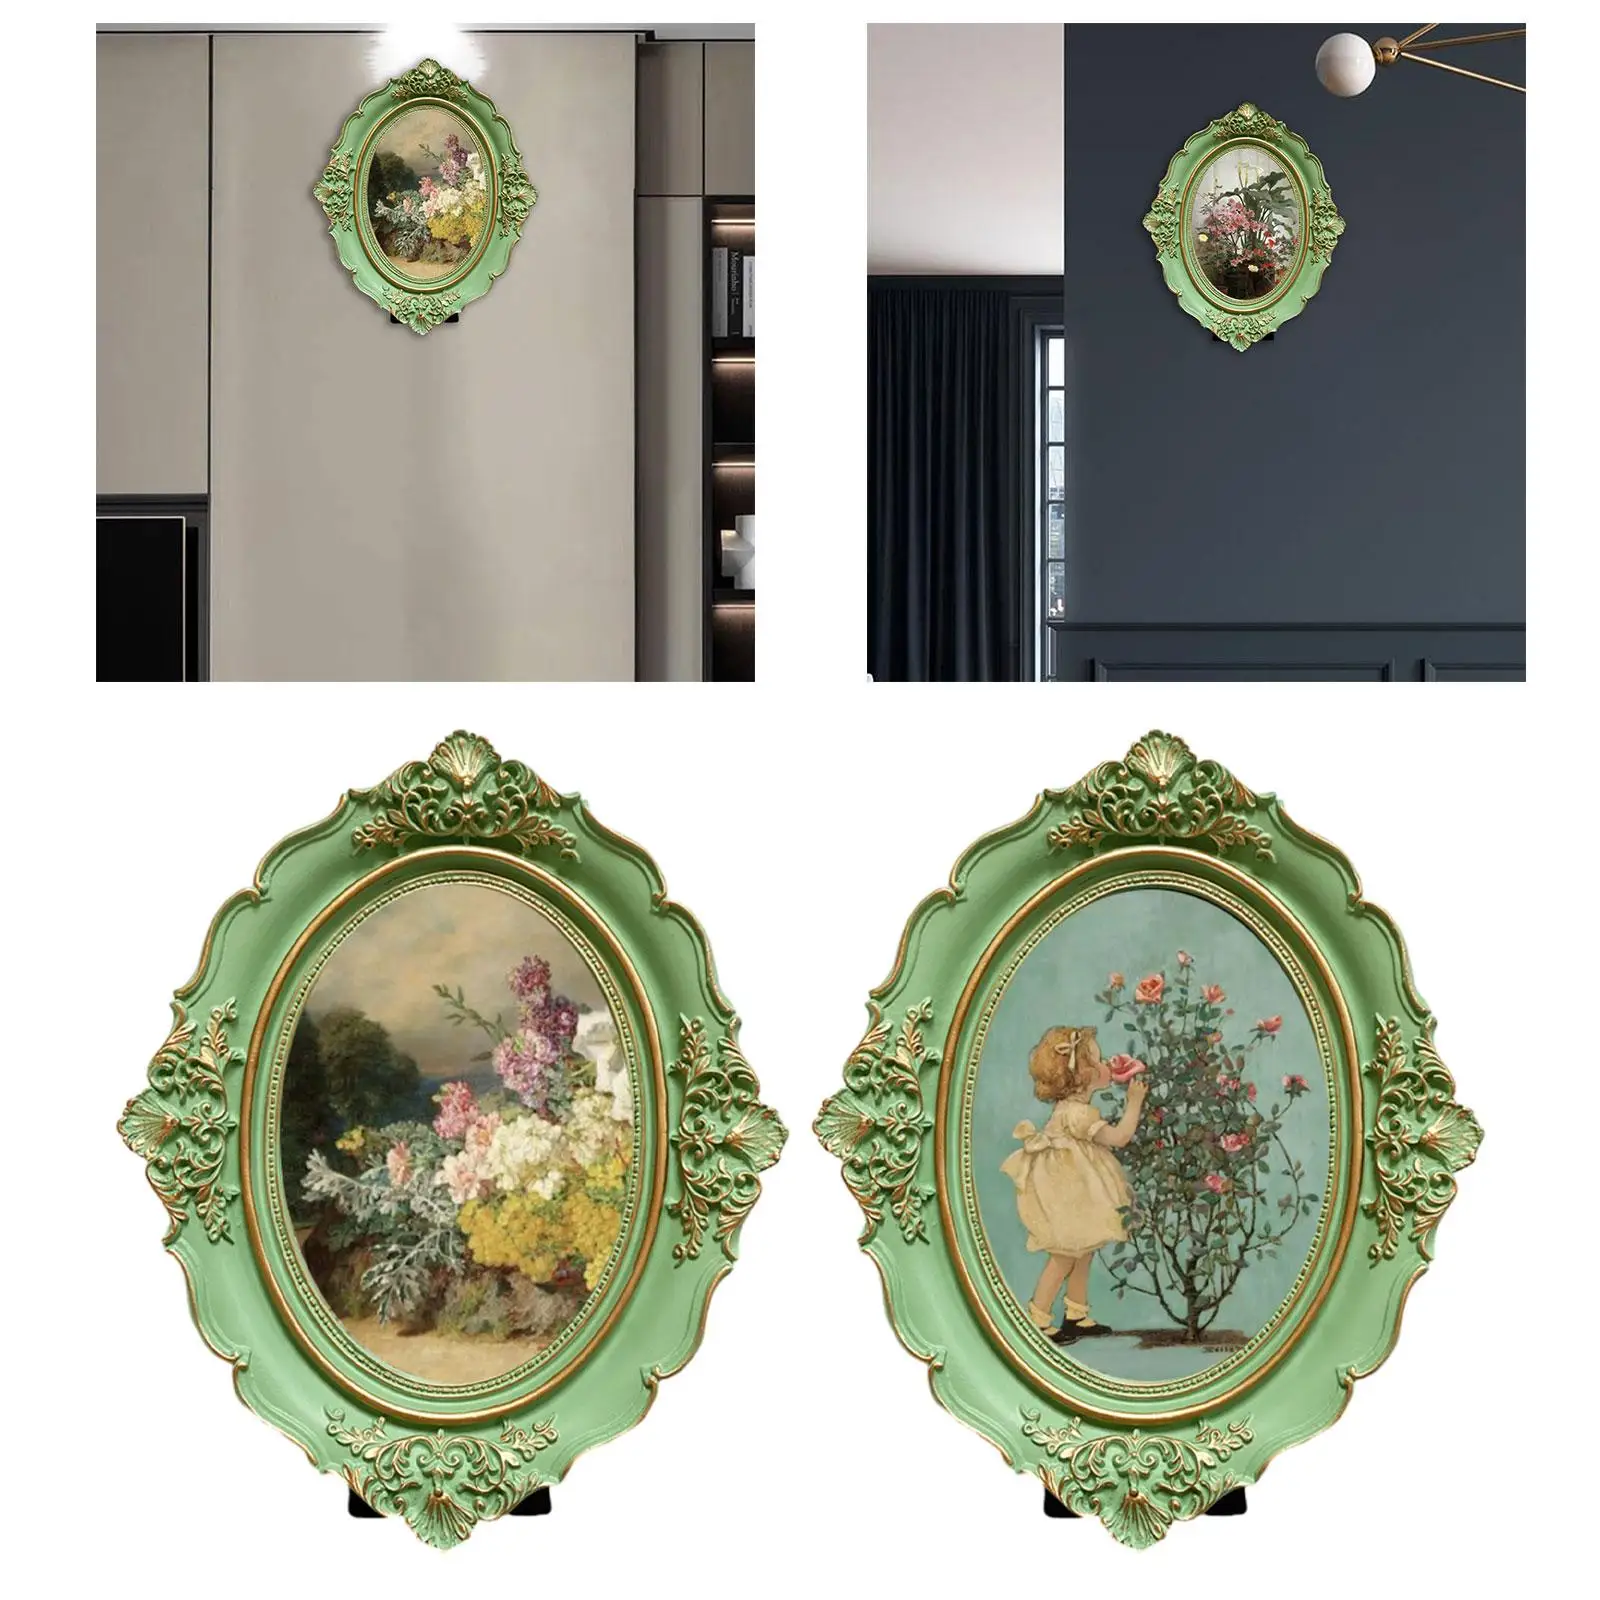 Picture Frame Antique Oval Decorative European Style Gift Photo Gallery Art for